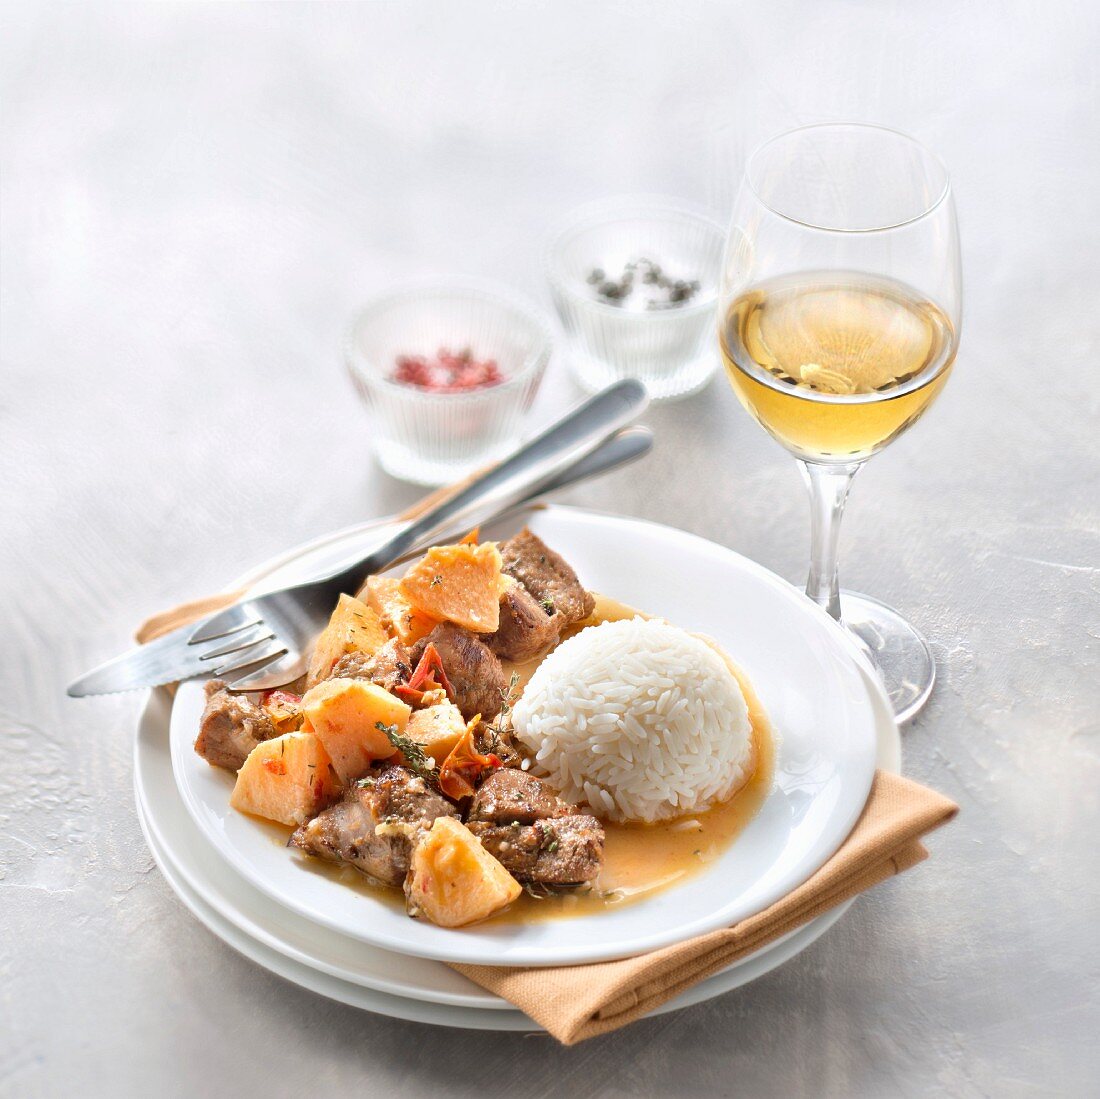 Sauté of lamb with quince and rice, glass of sweet white wine